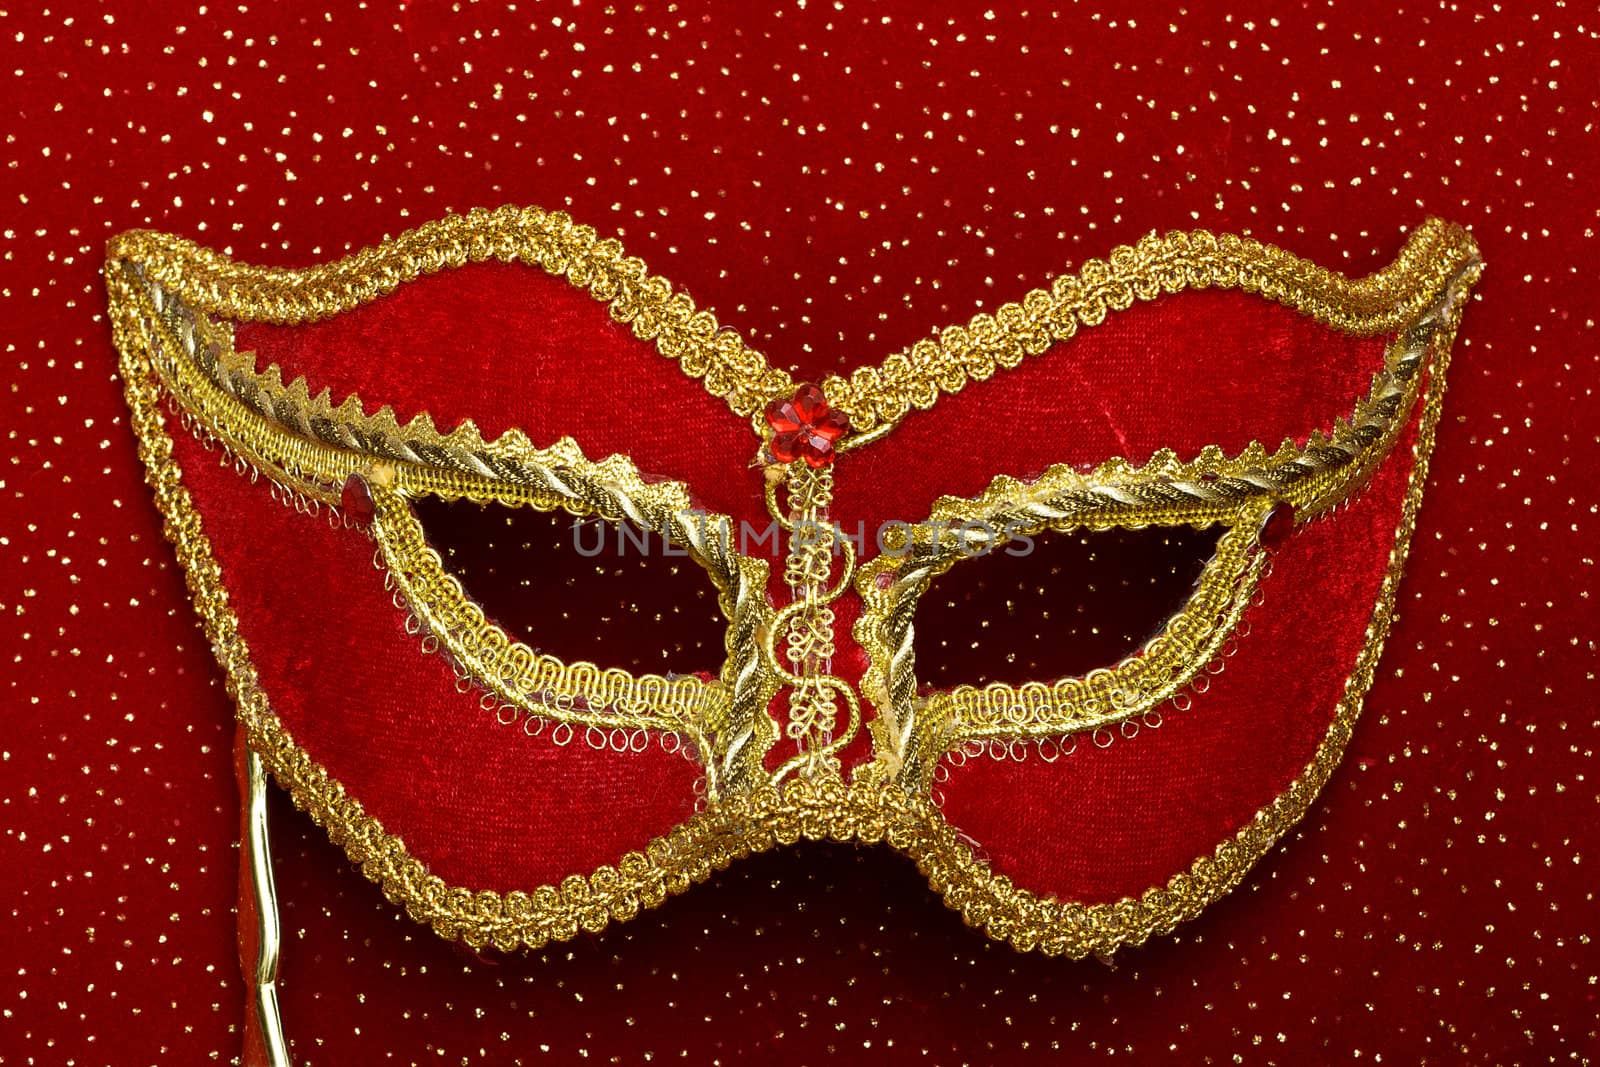 photo of theatrical mask on red background